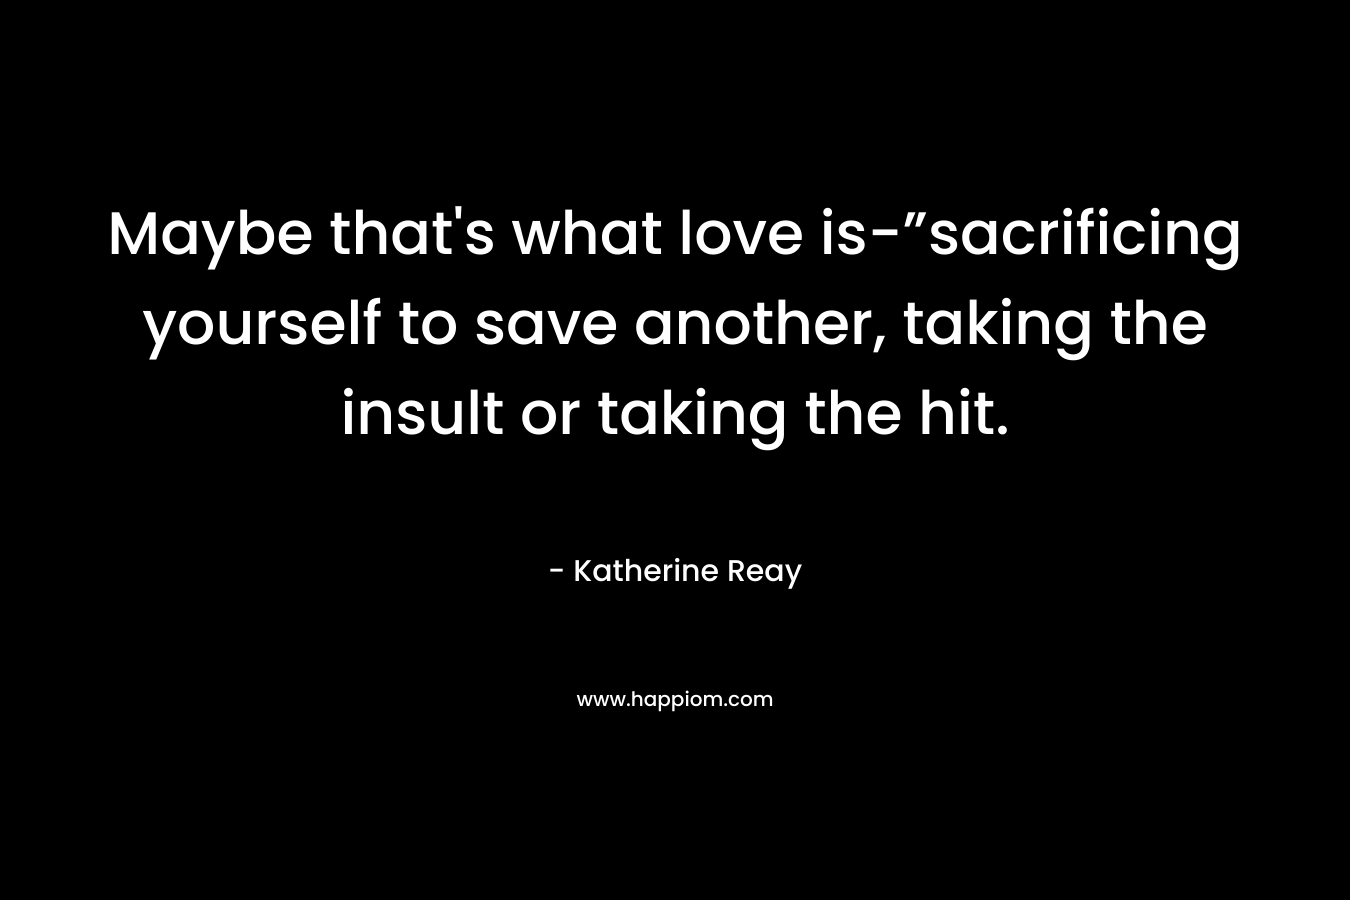 Maybe that’s what love is-”sacrificing yourself to save another, taking the insult or taking the hit. – Katherine Reay